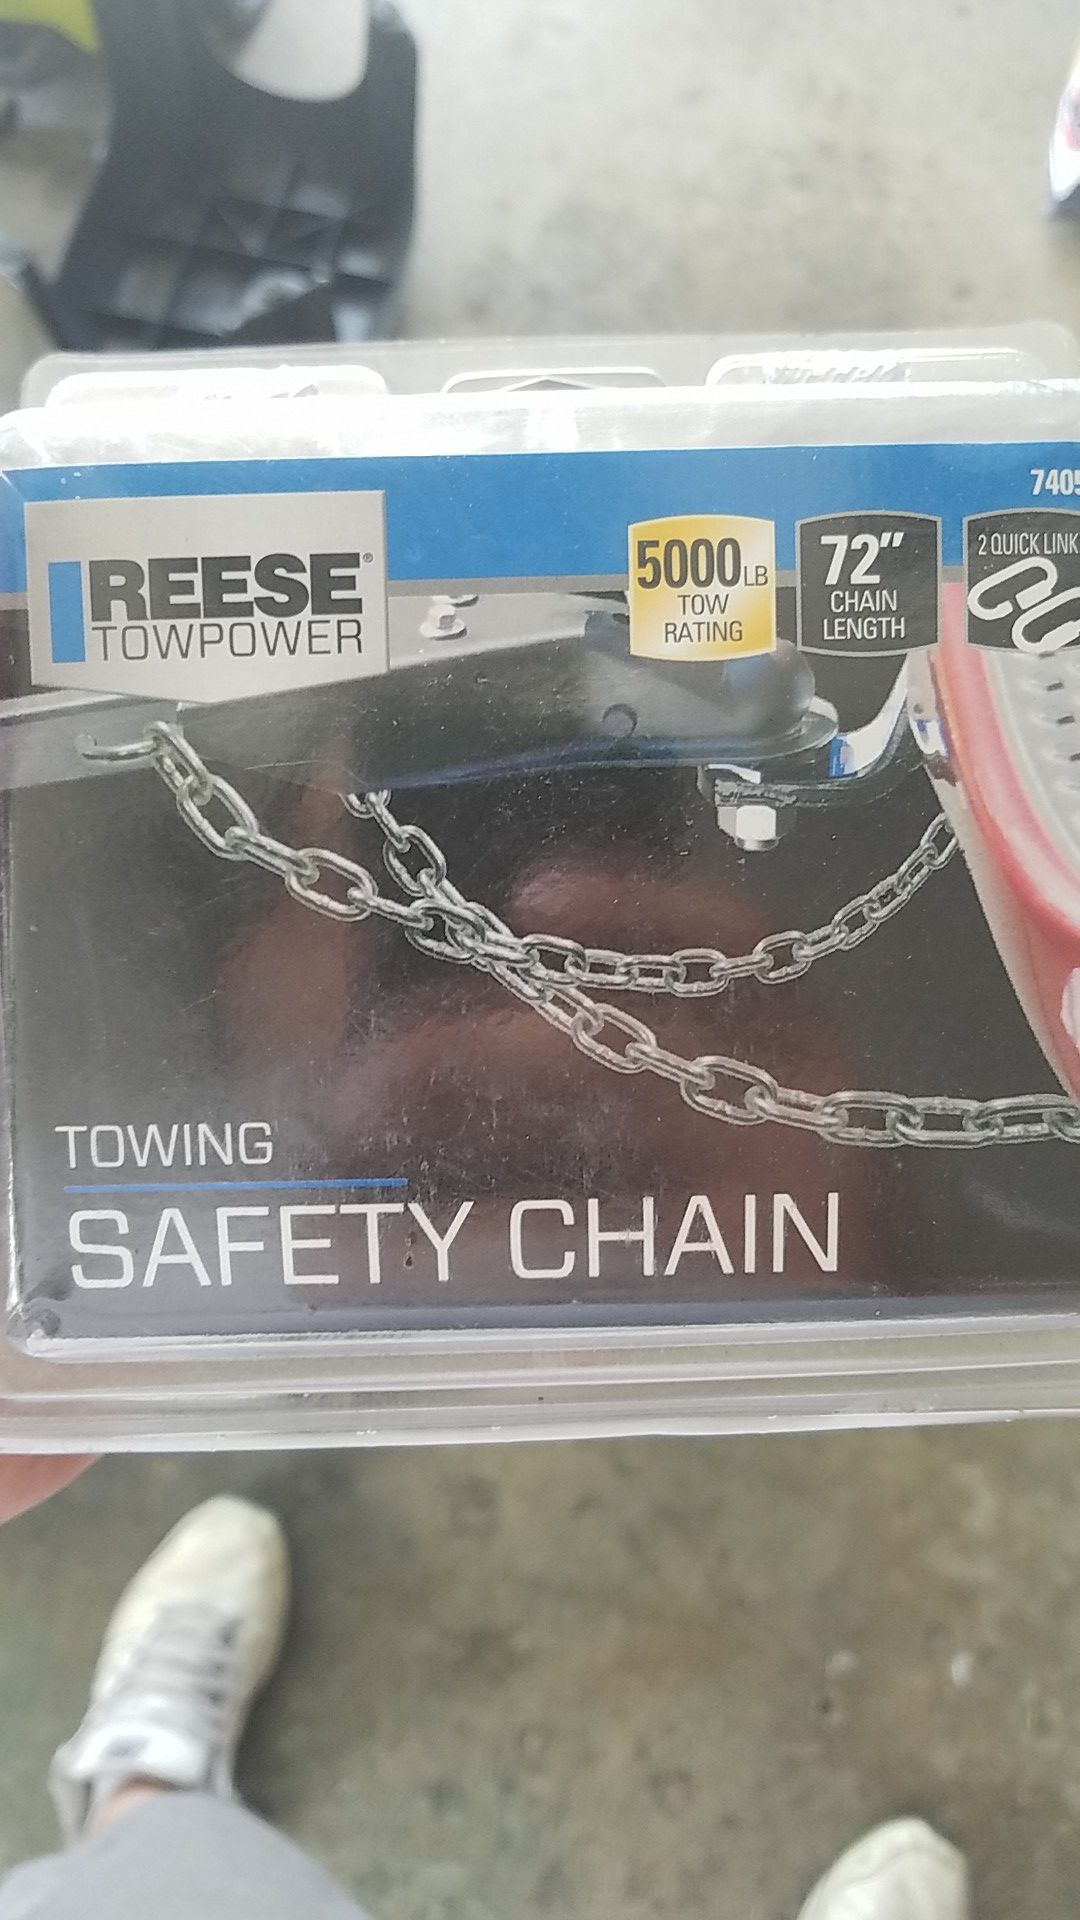 Reese towing safety chain with 2 quick links 74059